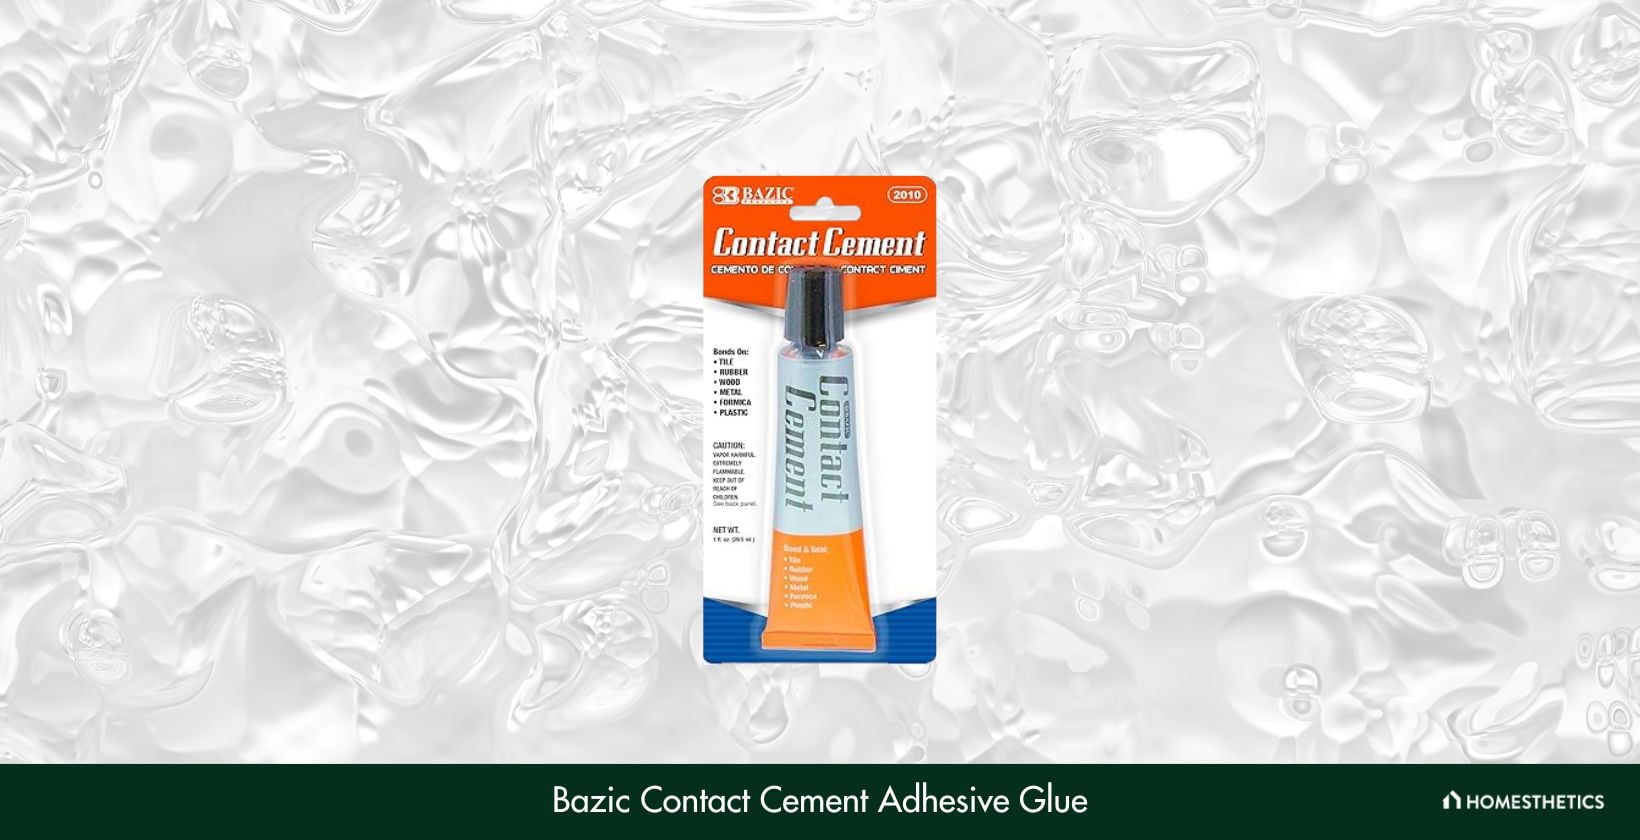 Bazic Contact Cement Adhesive Glue